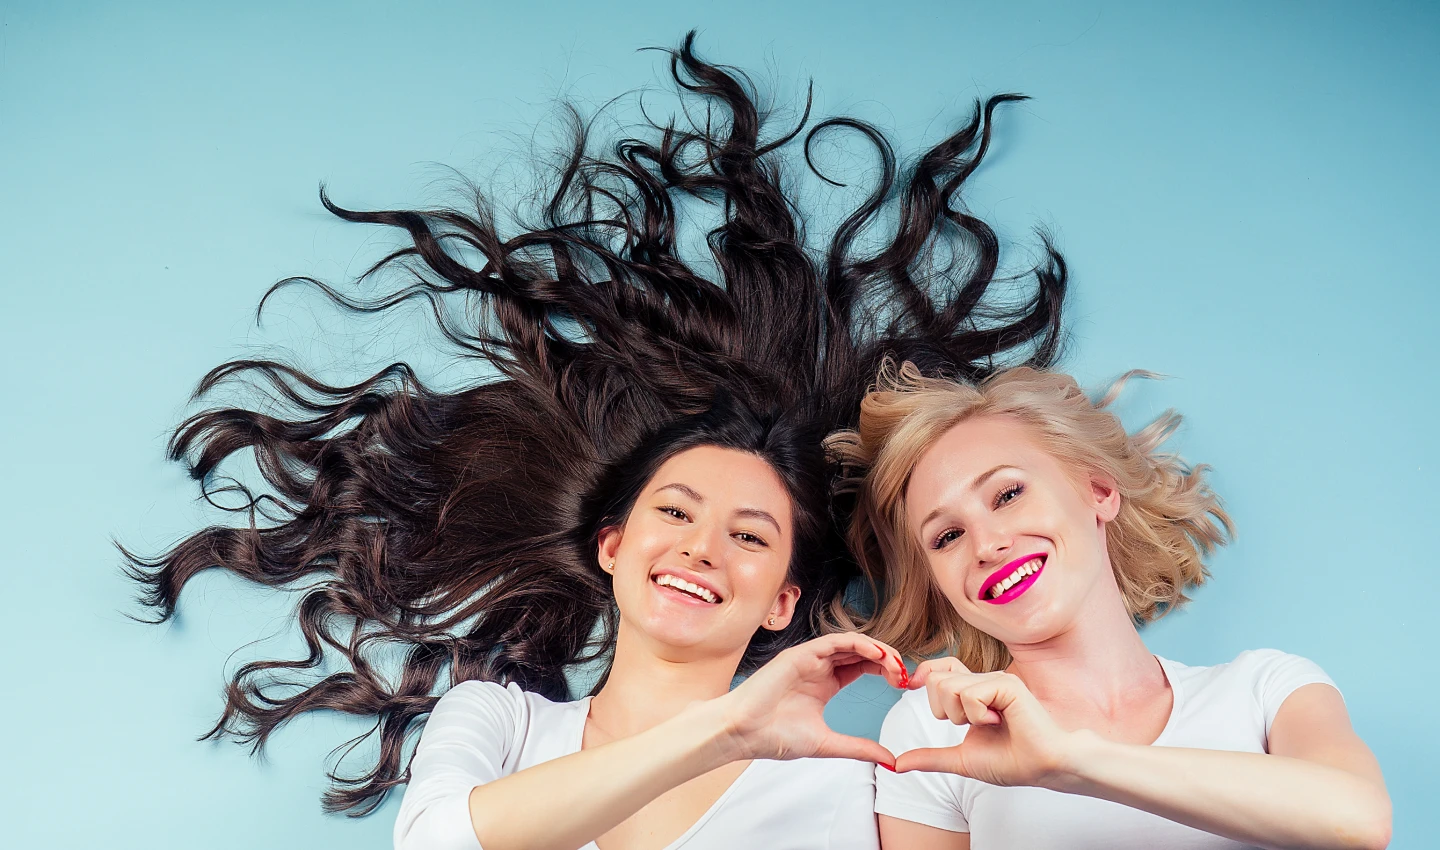 Two kind women with long hair and beautiful smiles lying down next to each other, promoting cruelty-free haircare.